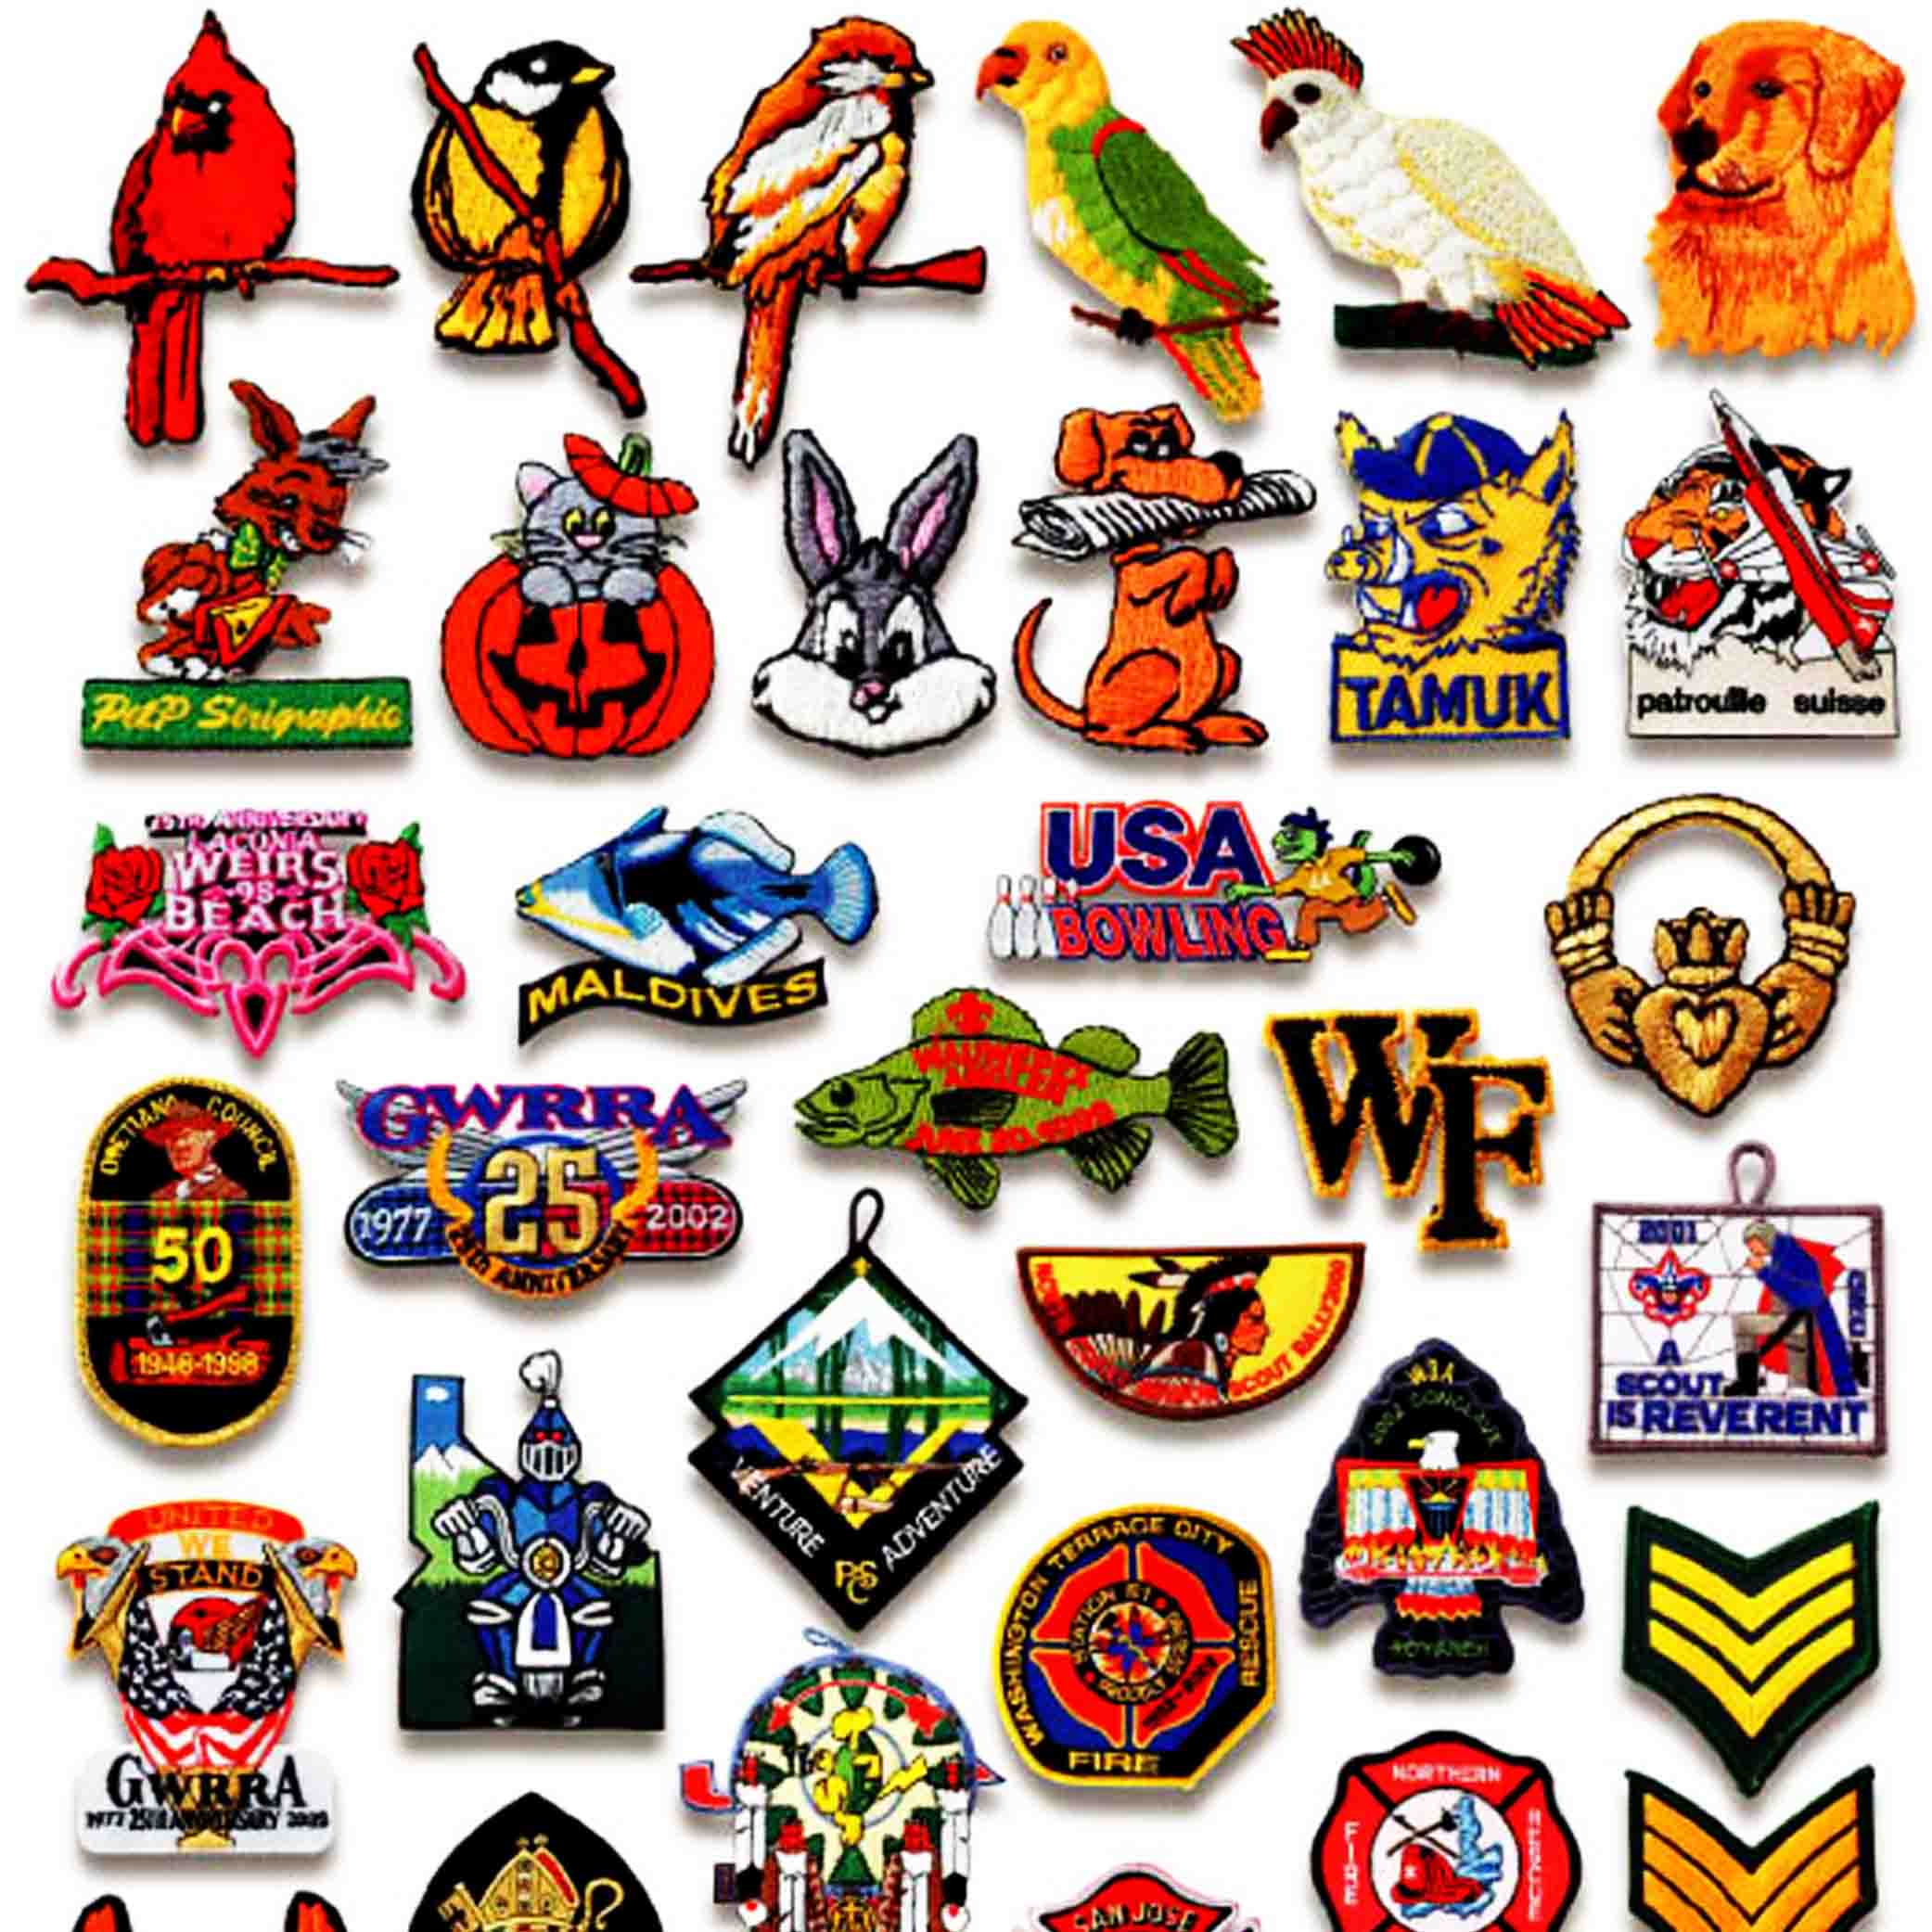 Brand Patches